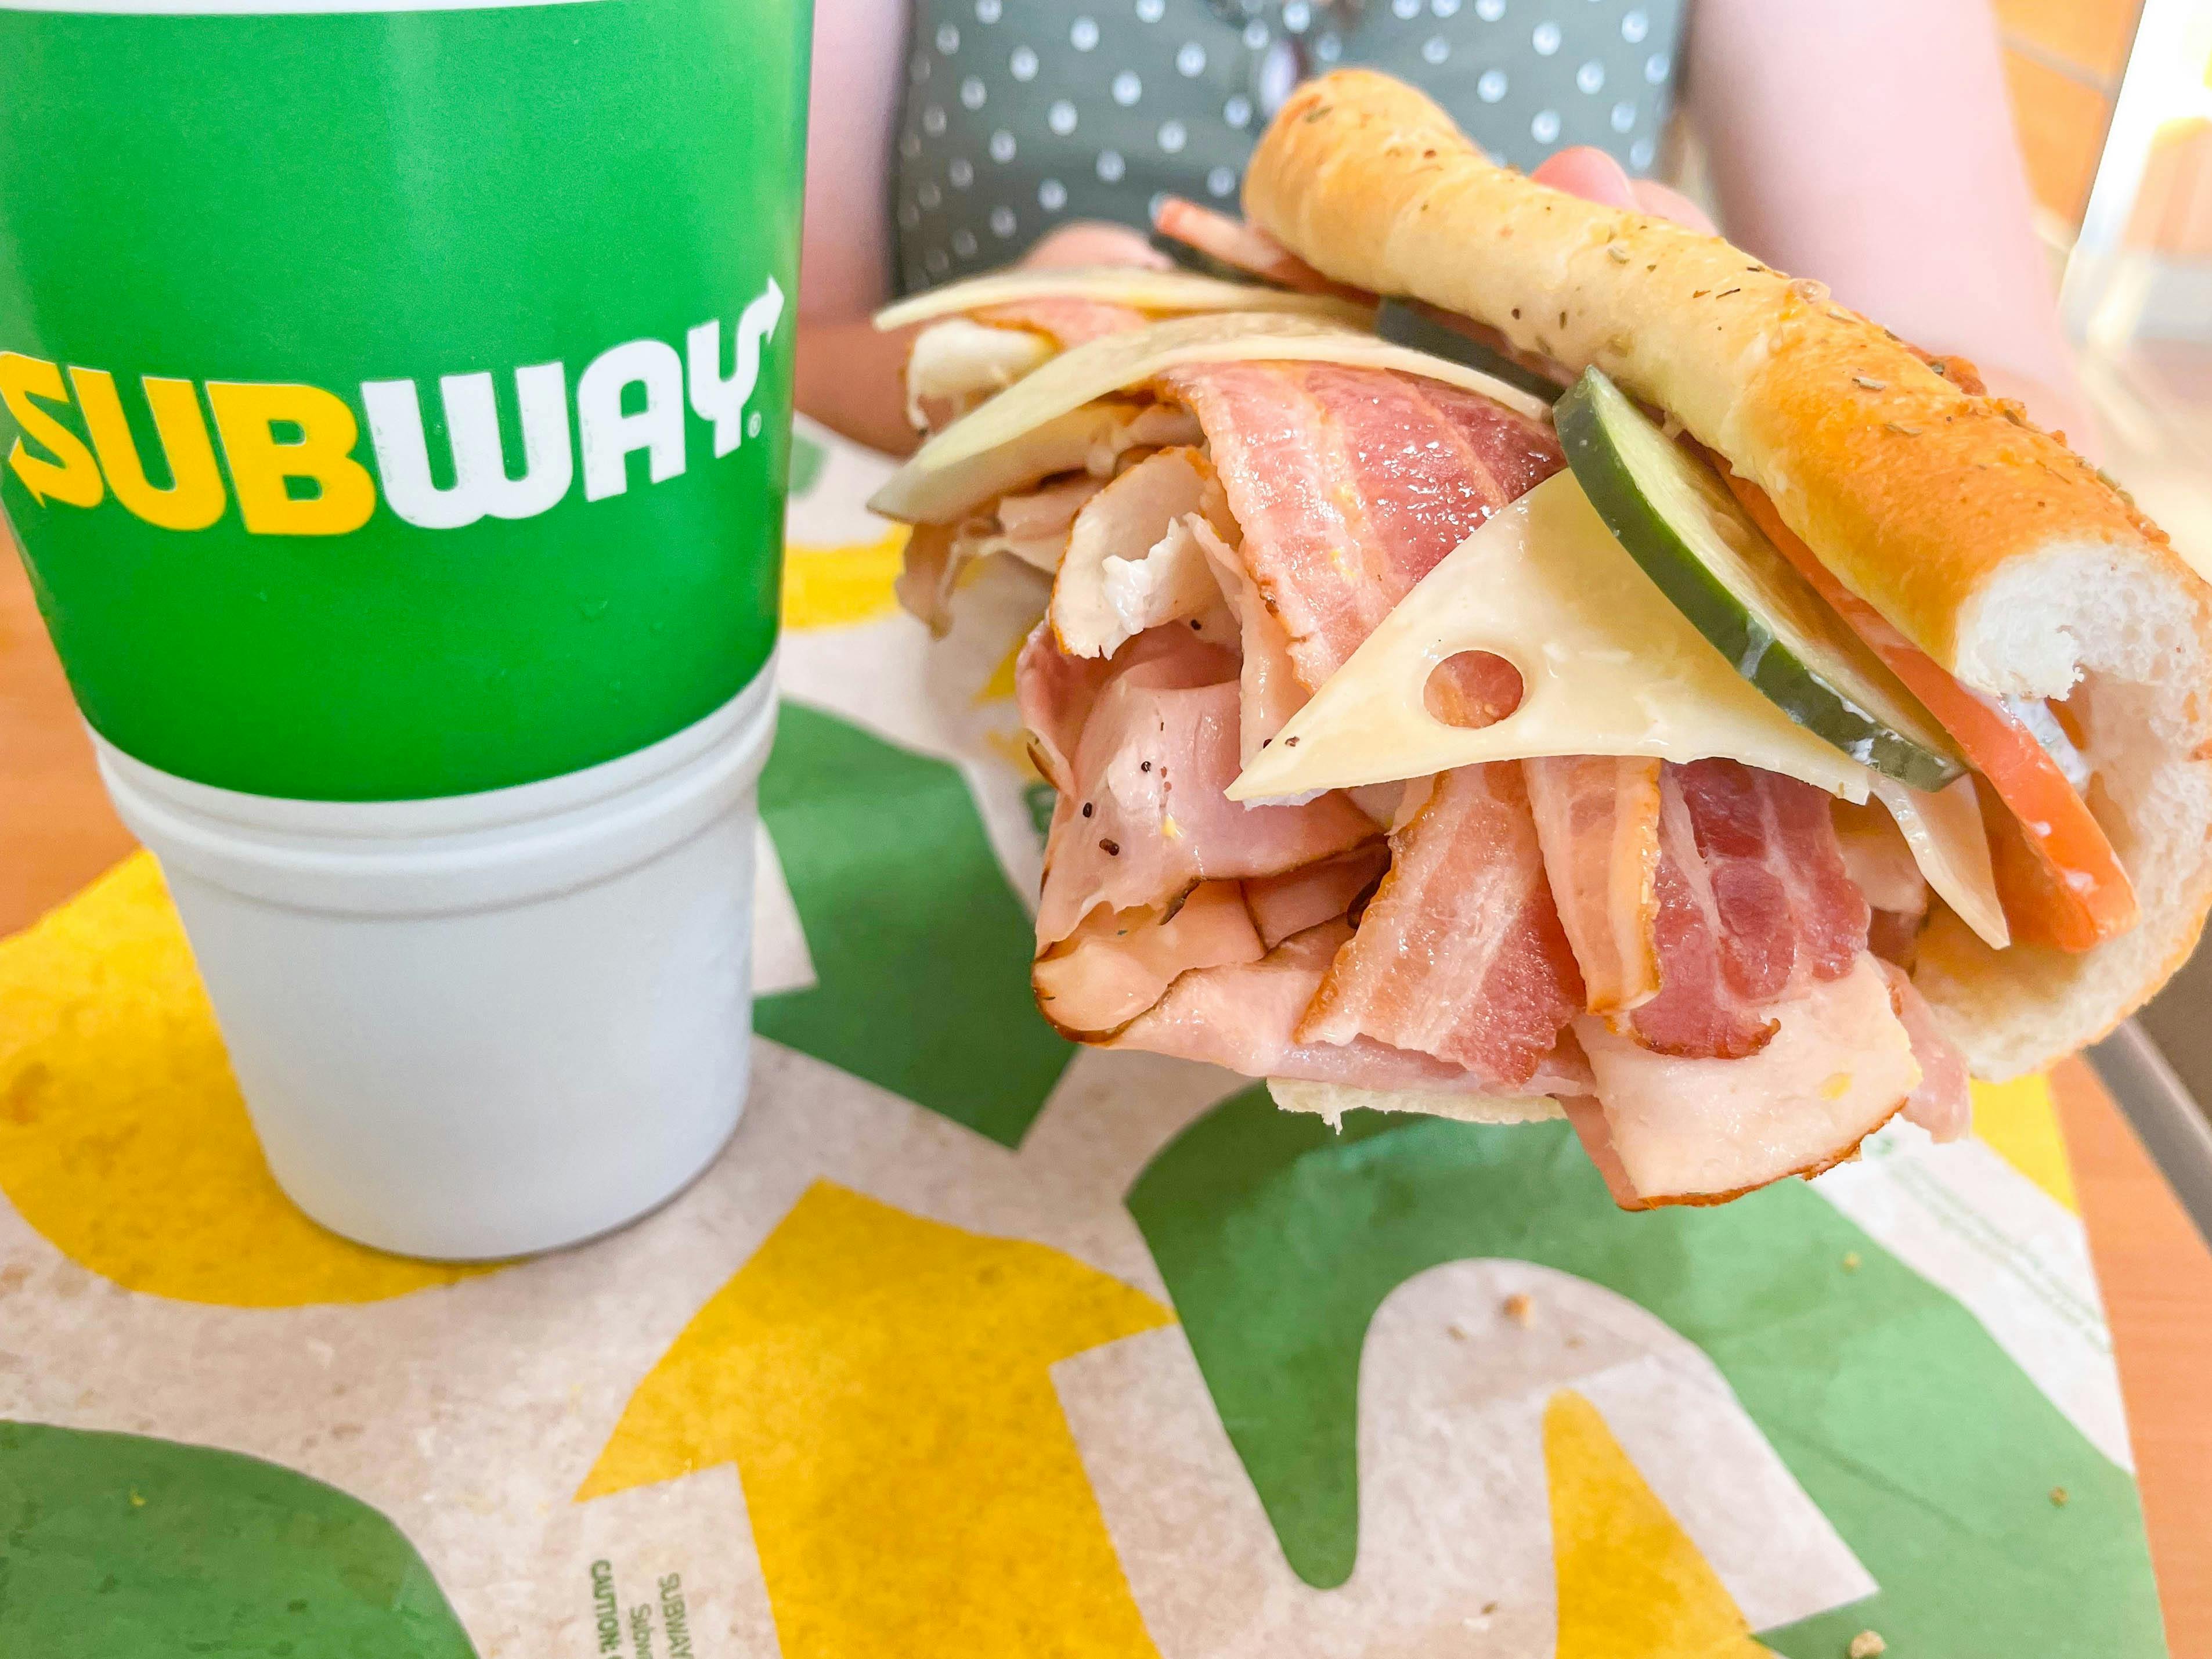 Does Subway Have Pizza In 2022? (Not What You Think)